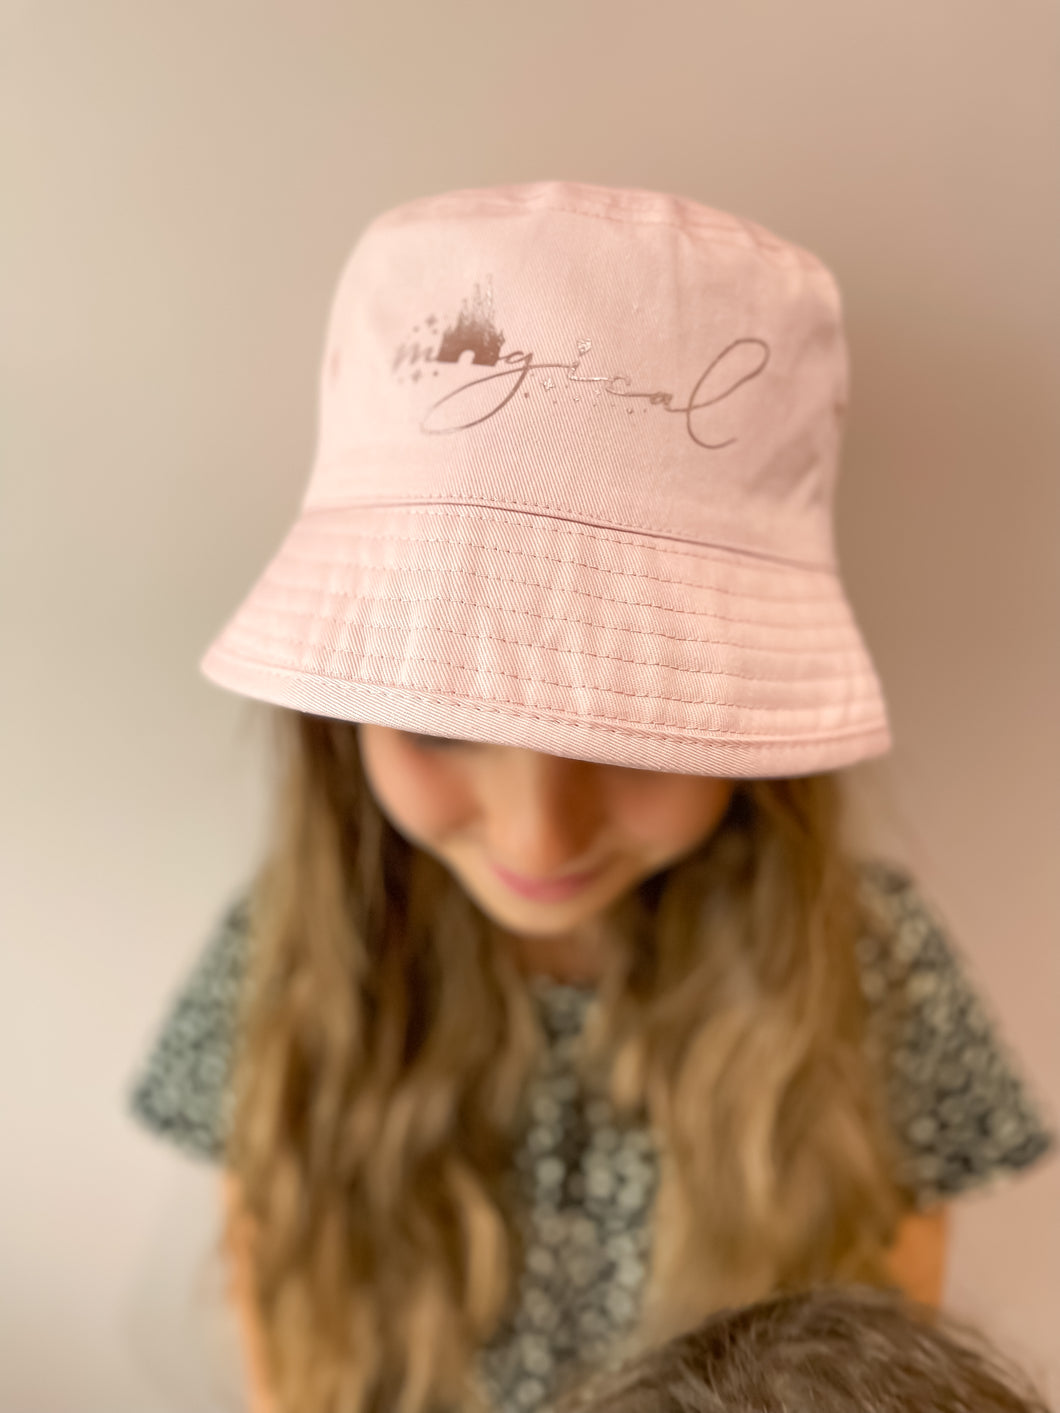 Magical Bucket Hats - all ages